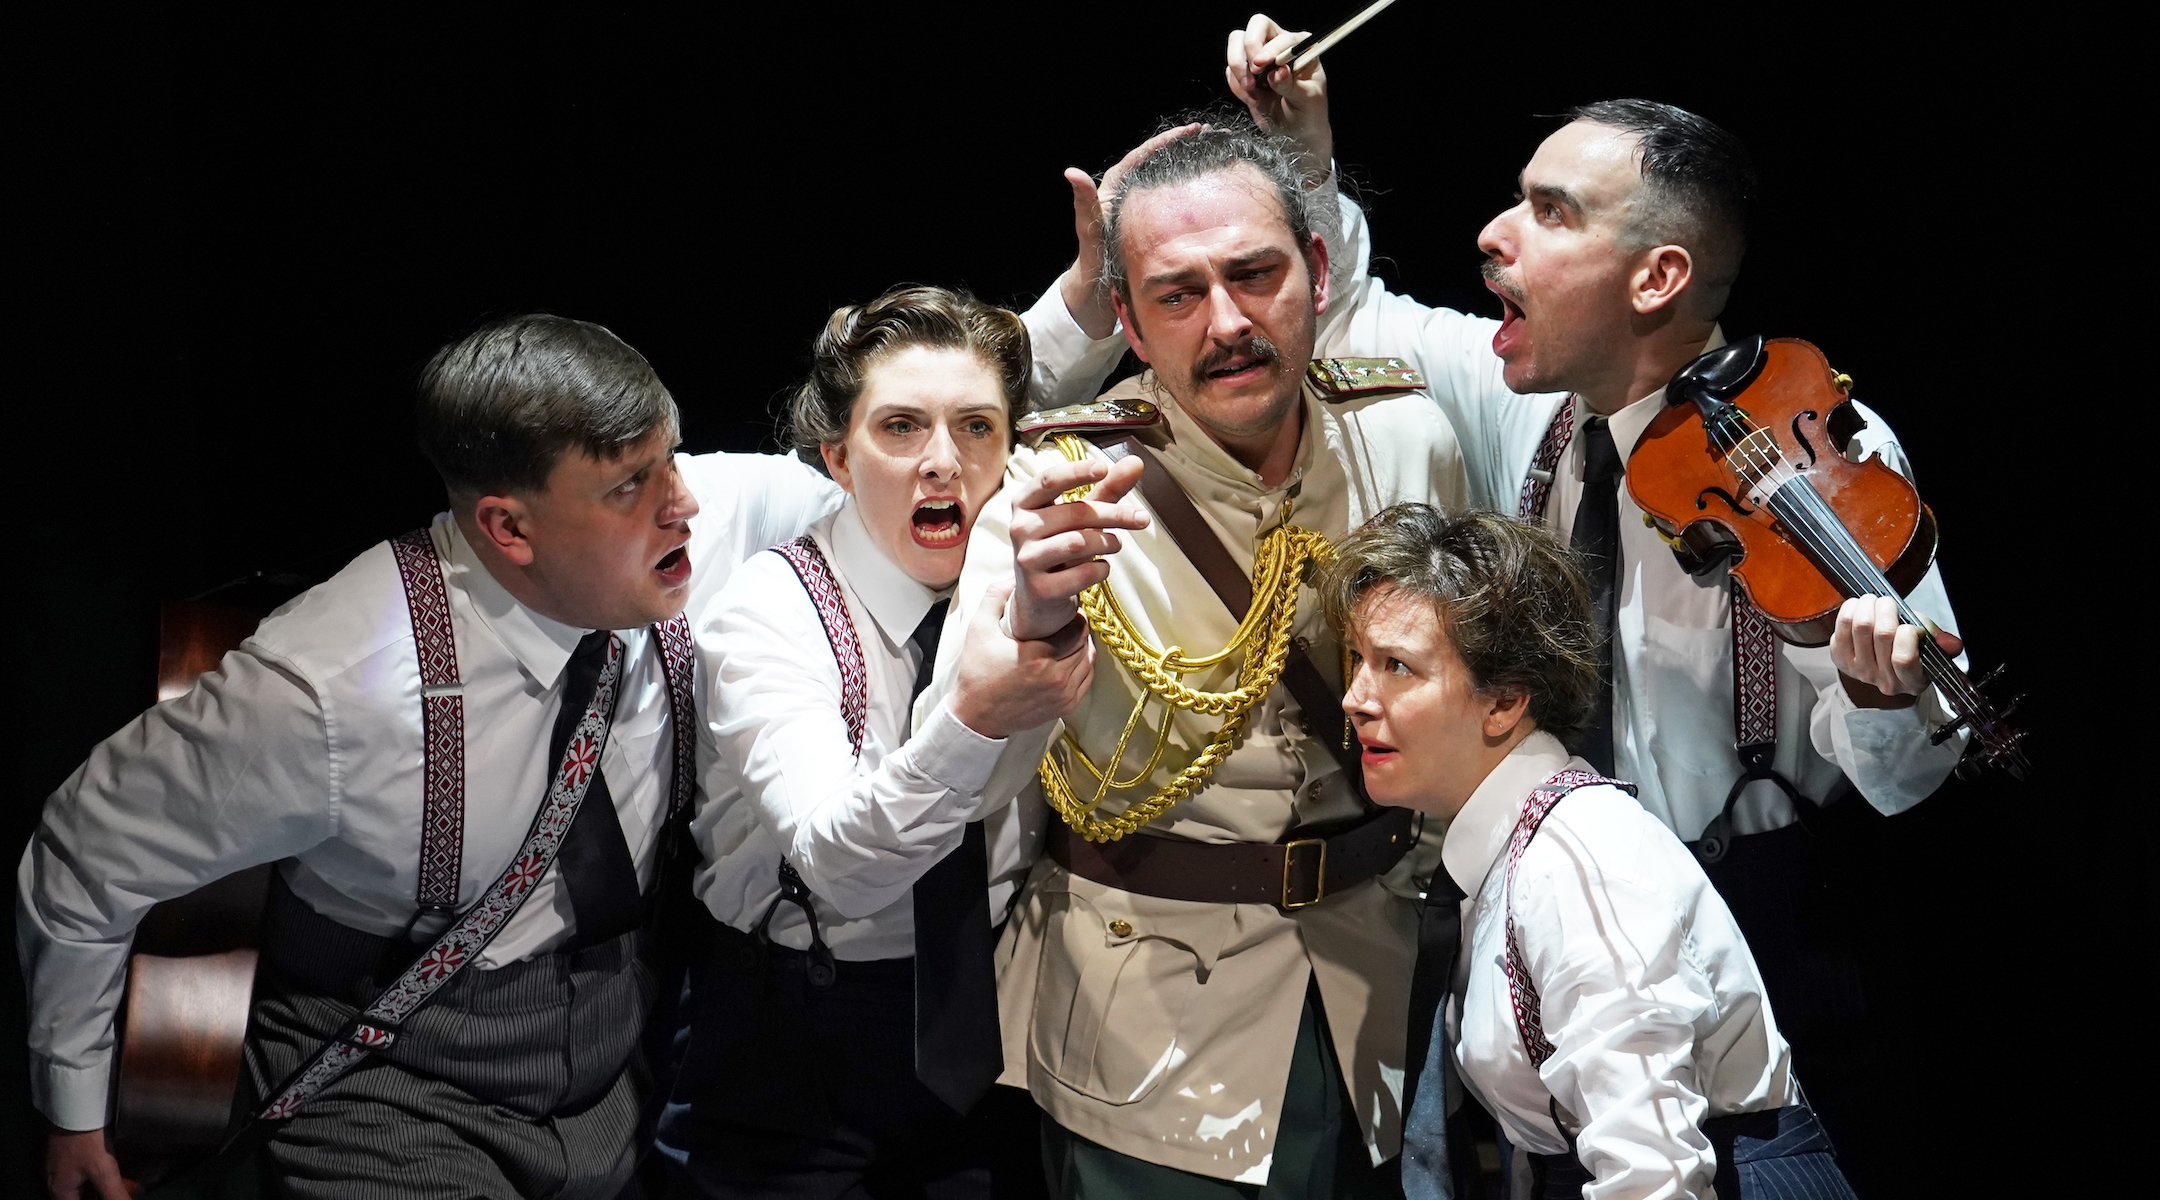 From left: David Leopold, Sasha Wilson, Joseph-Cullen, Lawrence Boothman and Clare Fraenkel in 'The Brief Life and Mysterious Death of Boris III, King of Bulgaria,' now at 59E59 Theaters. (Carol Rosegg)